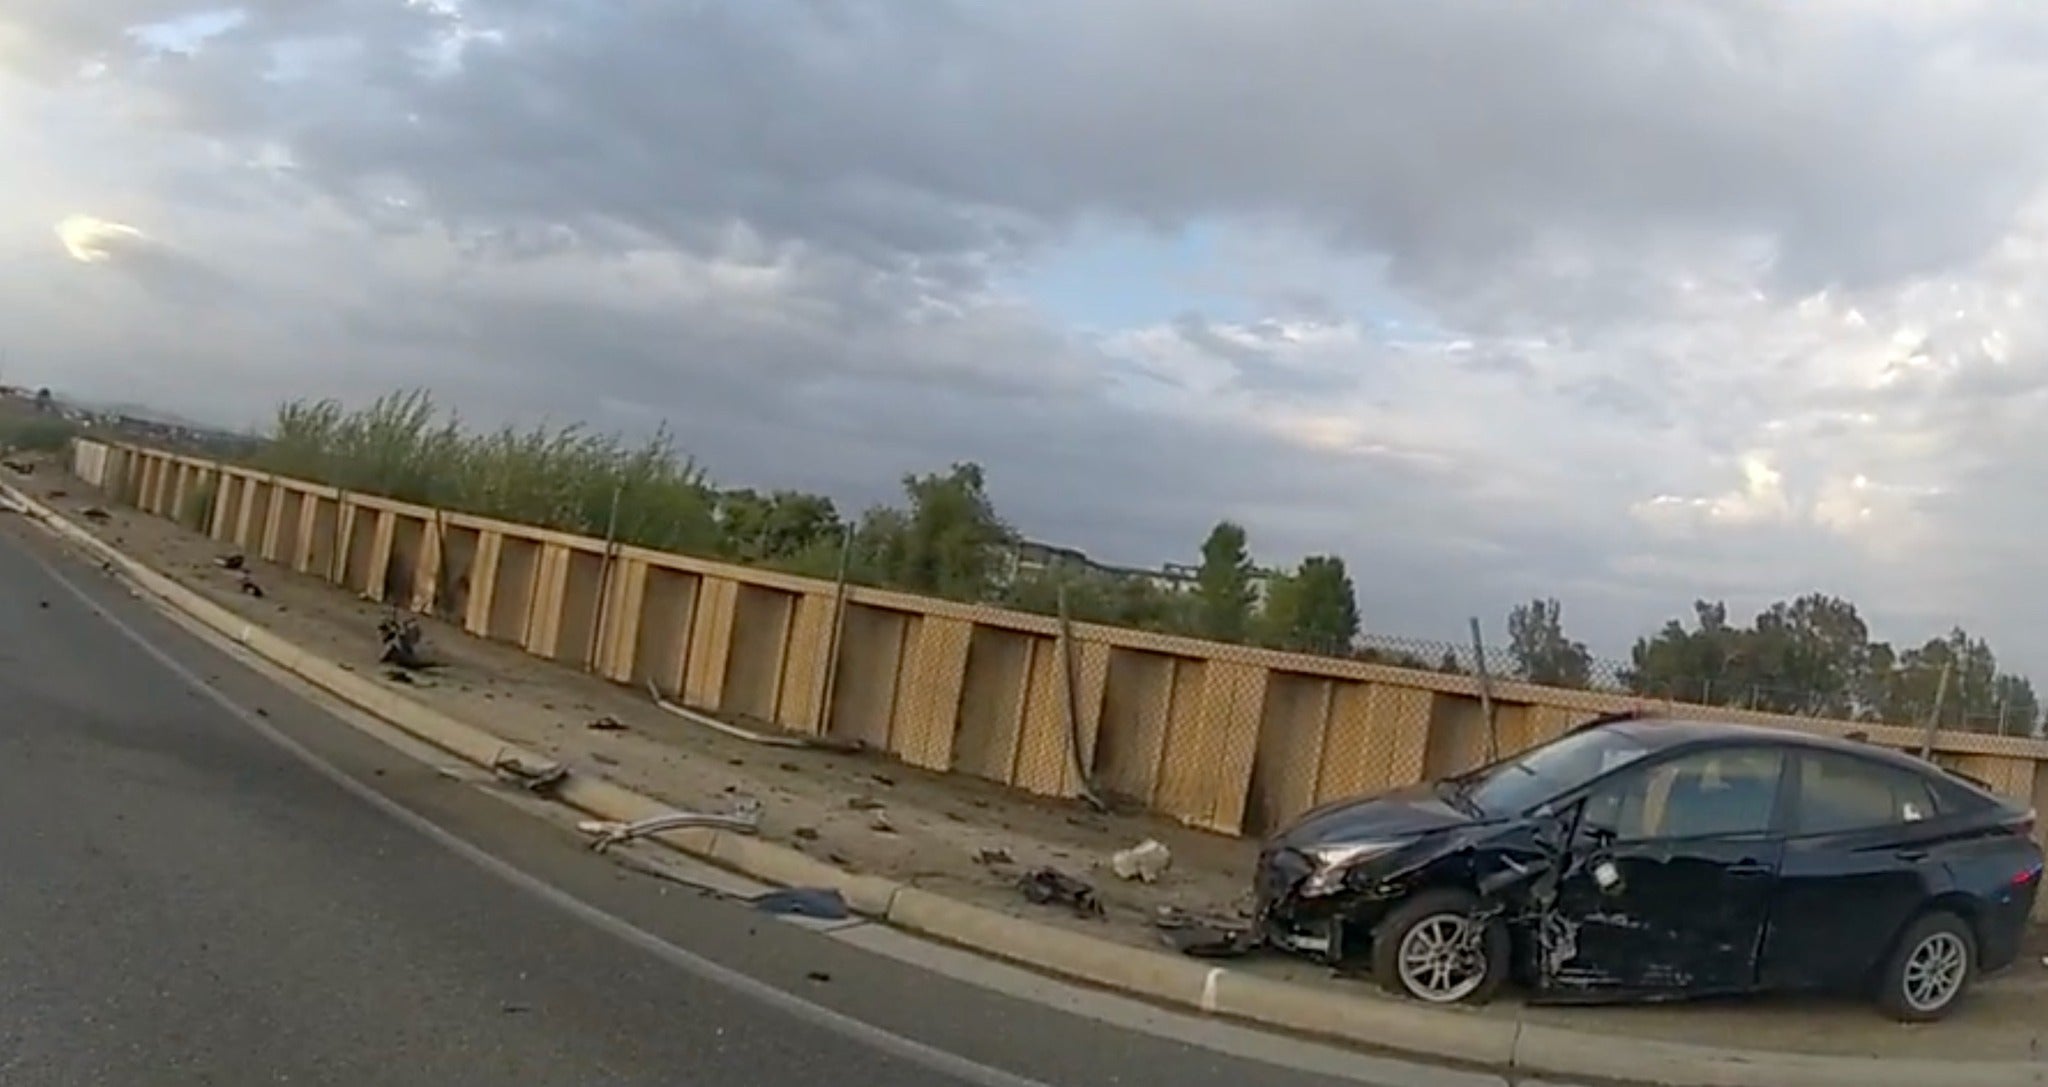 No one was seriously injured after the Lamborghini lost control